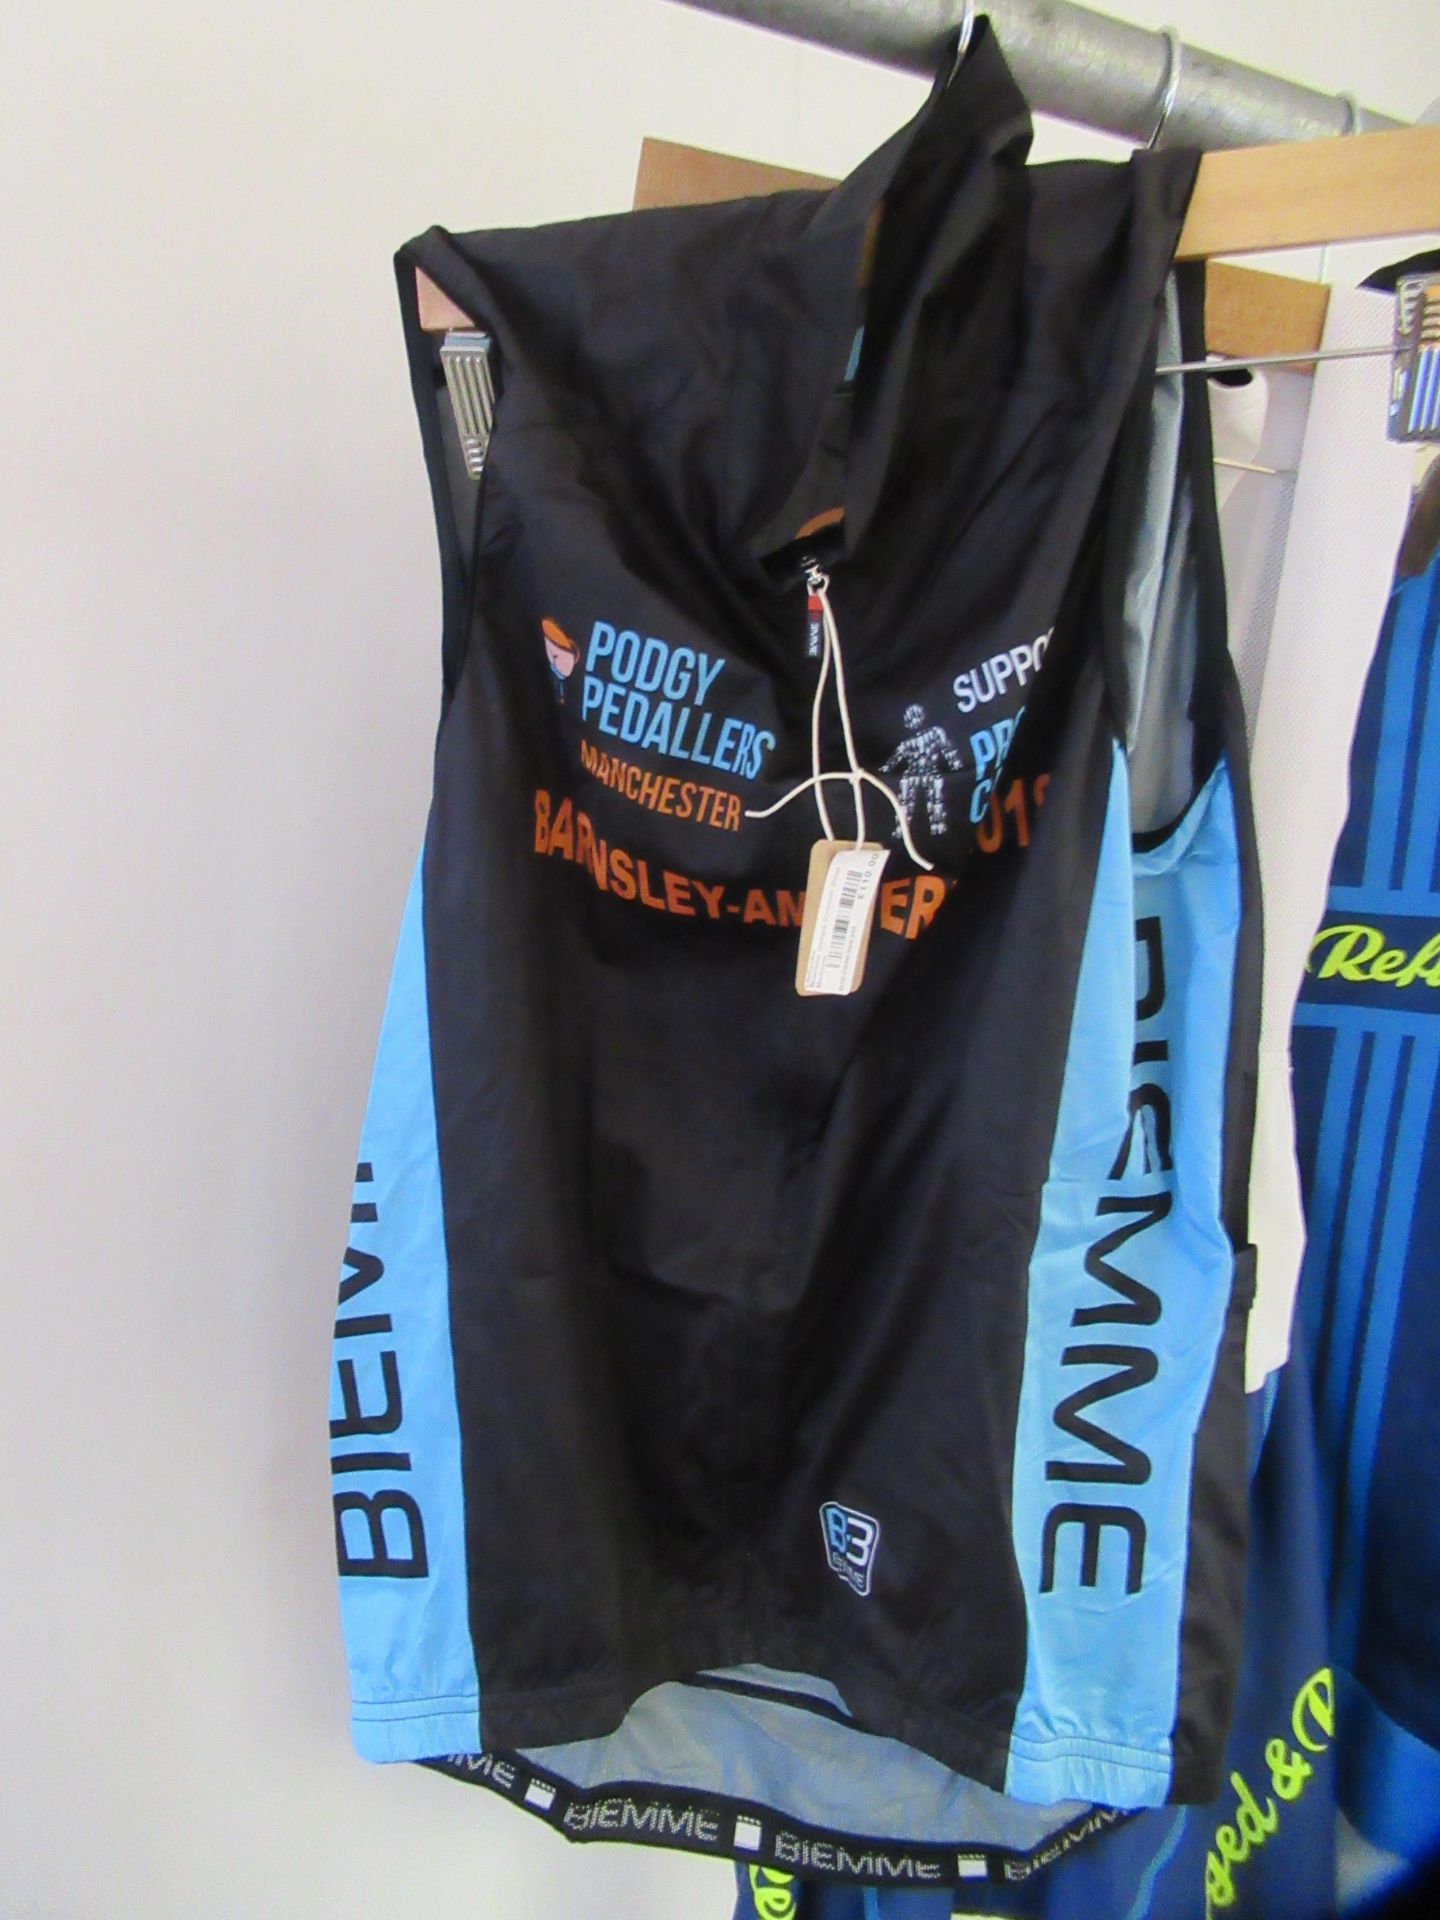 M Biemme Male Cycling Clothes - Image 2 of 8